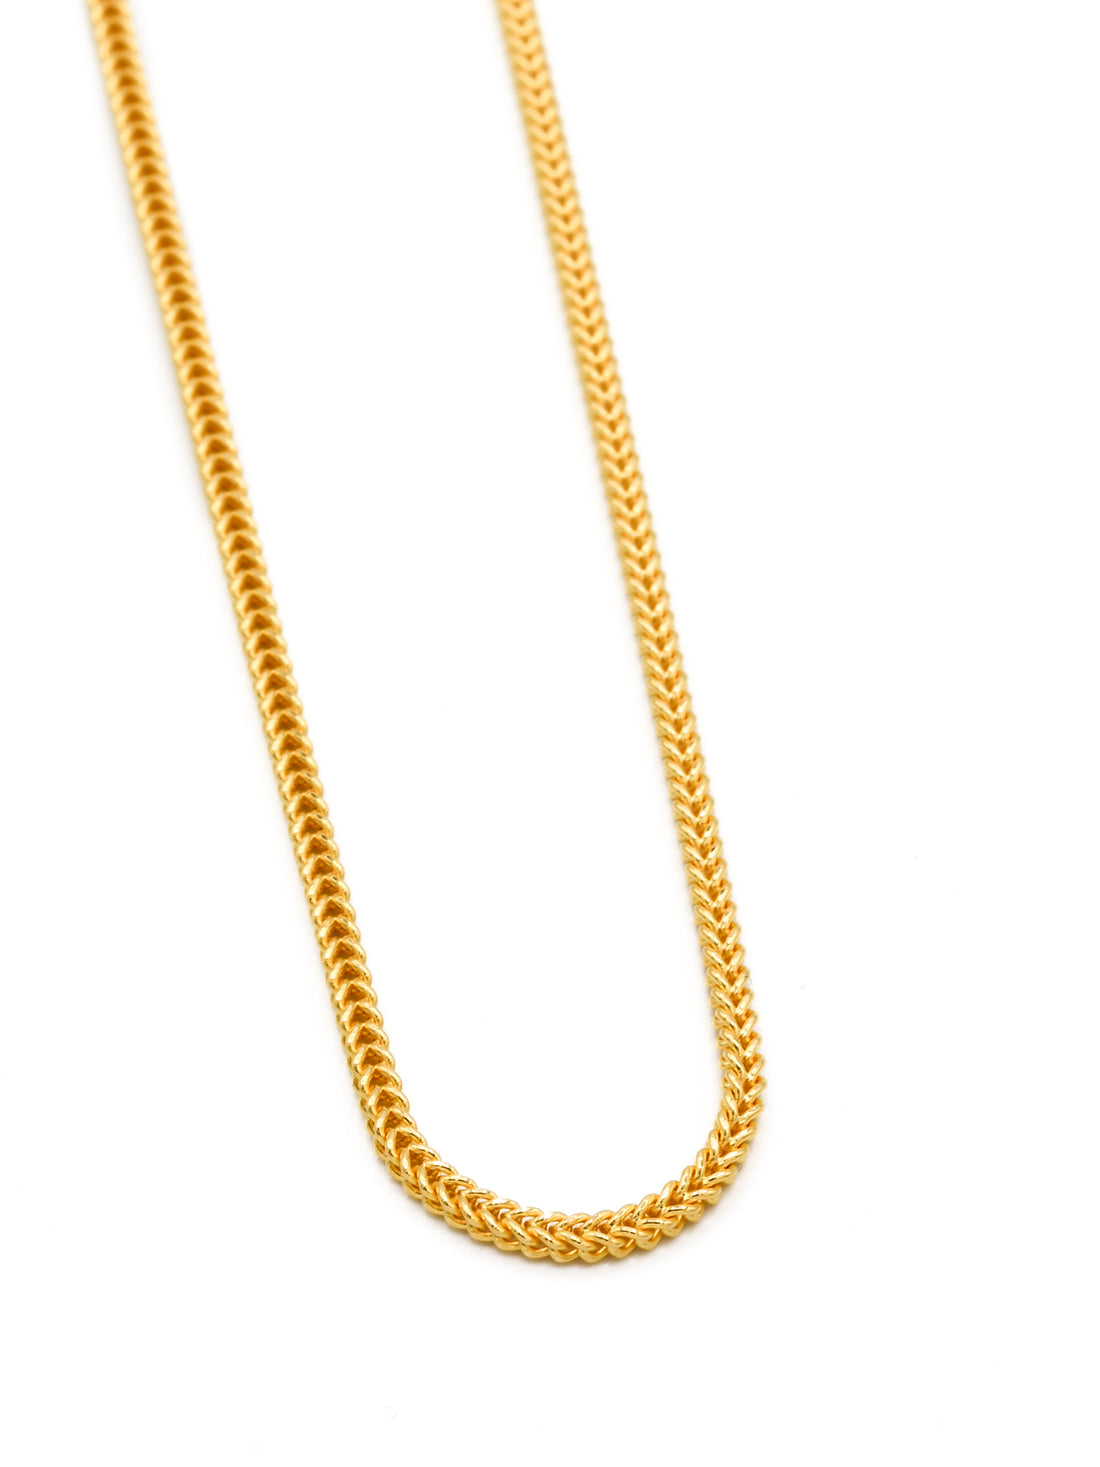 22ct Gold Hollow Fox Tail Chain - 40 CM - Roop Darshan